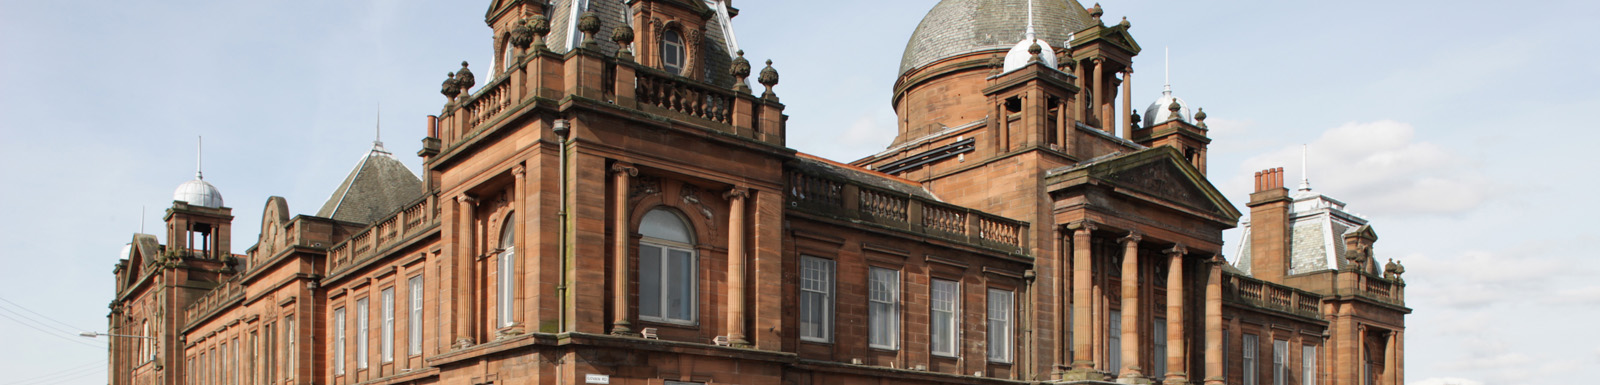 Detail of Govan Town Hall, now home to Film City